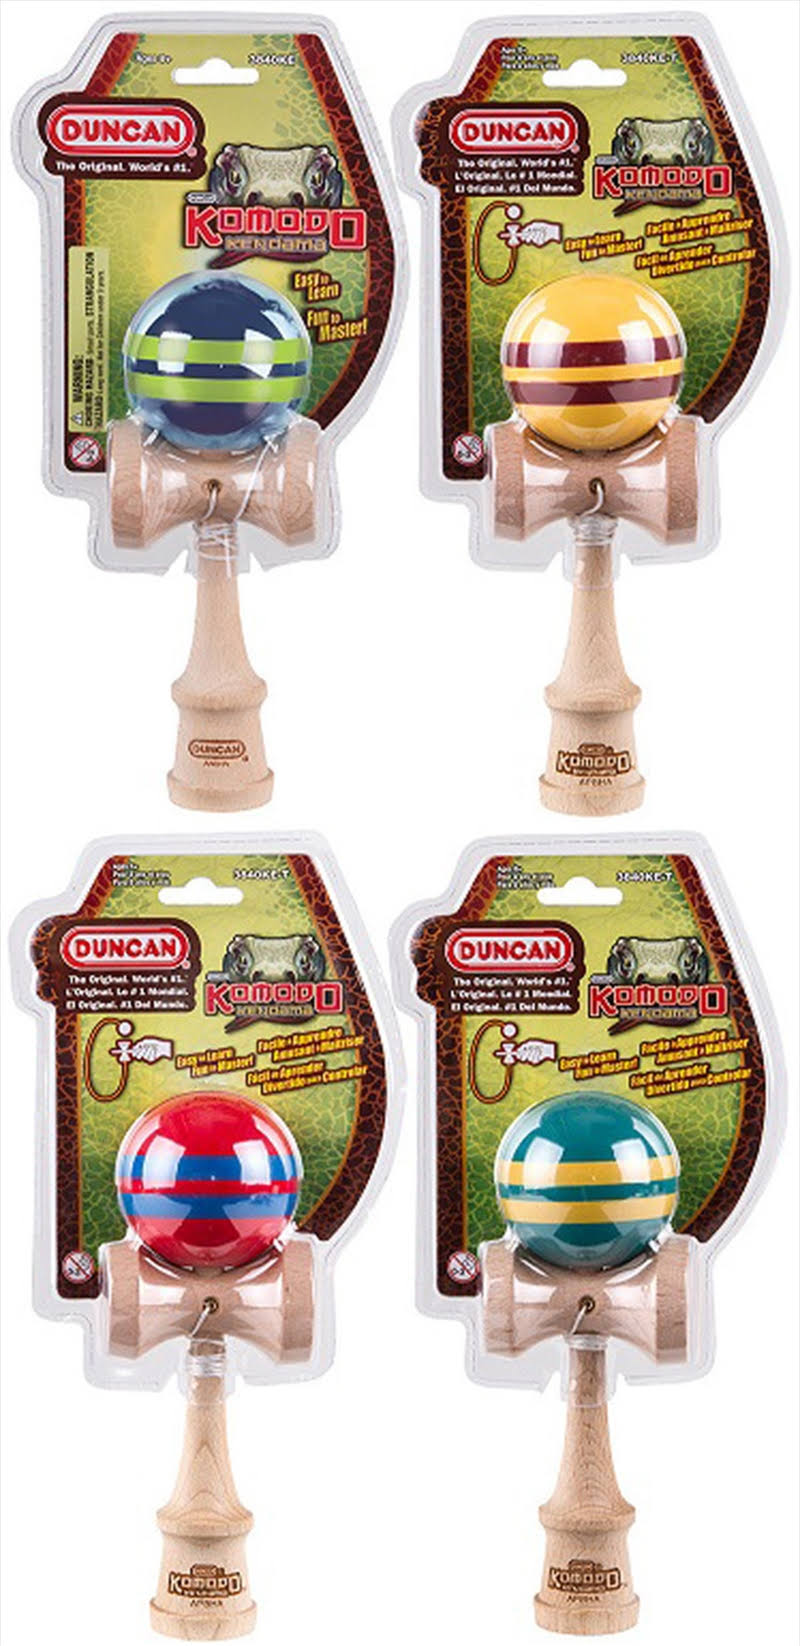 Duncan Komodo Kendama Toy - Color and Styles May Vary